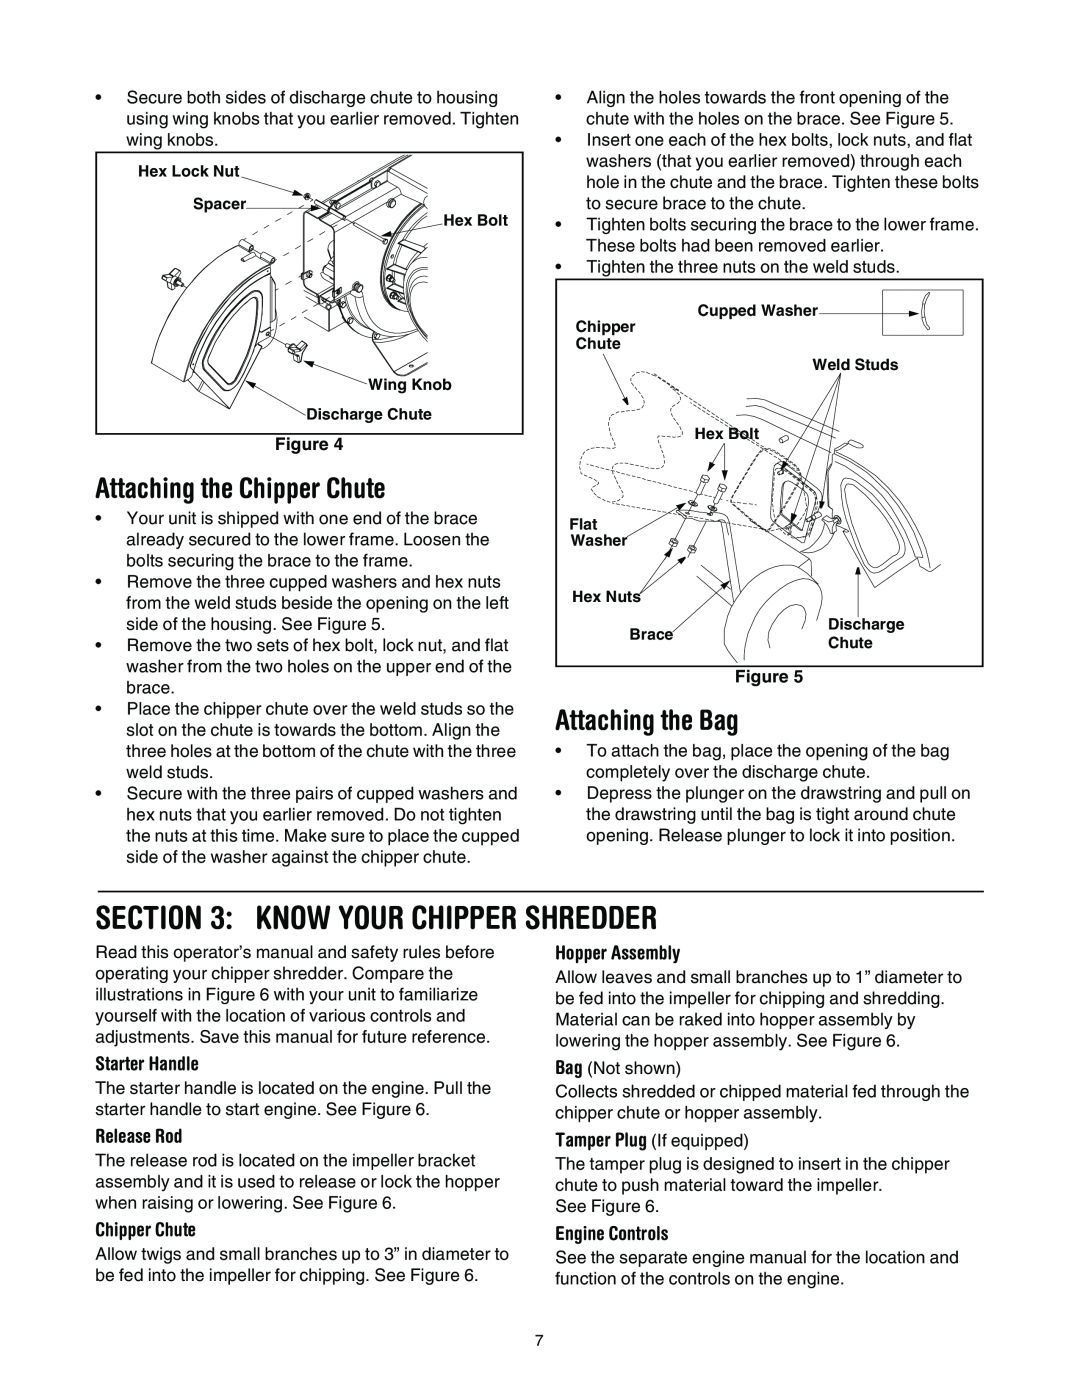 Troy-Bilt 494 Know Your Chipper Shredder, Attaching the Chipper Chute, Attaching the Bag, Starter Handle, Release Rod 